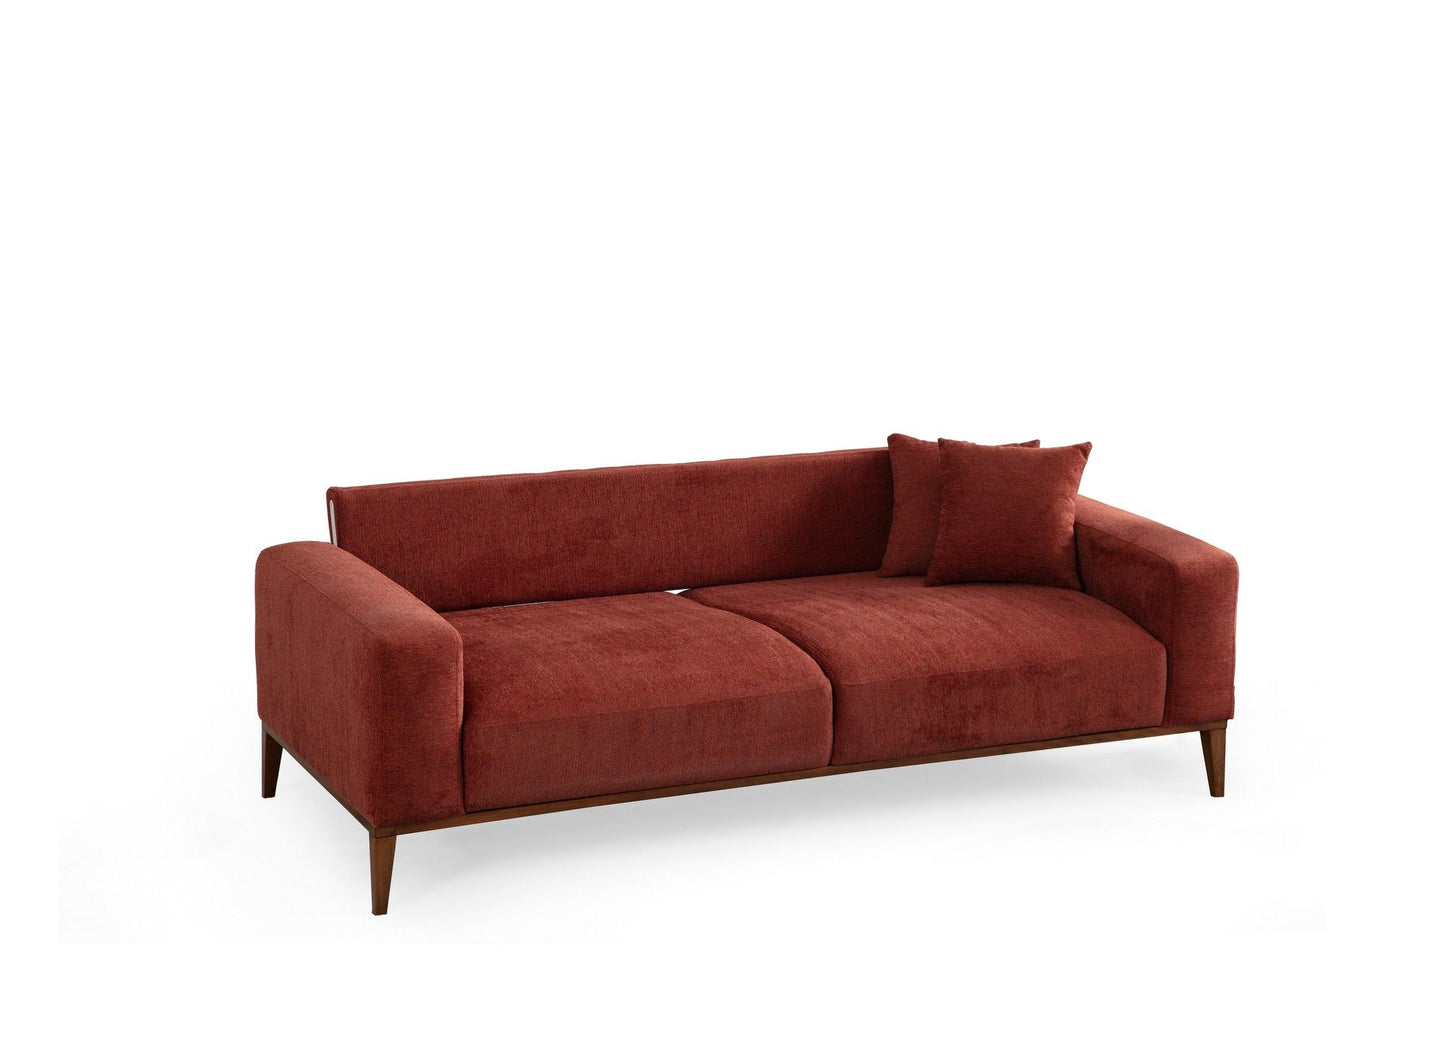 Sinor 3 Seater - Tile Red - 3-Seat Sofa-Bed